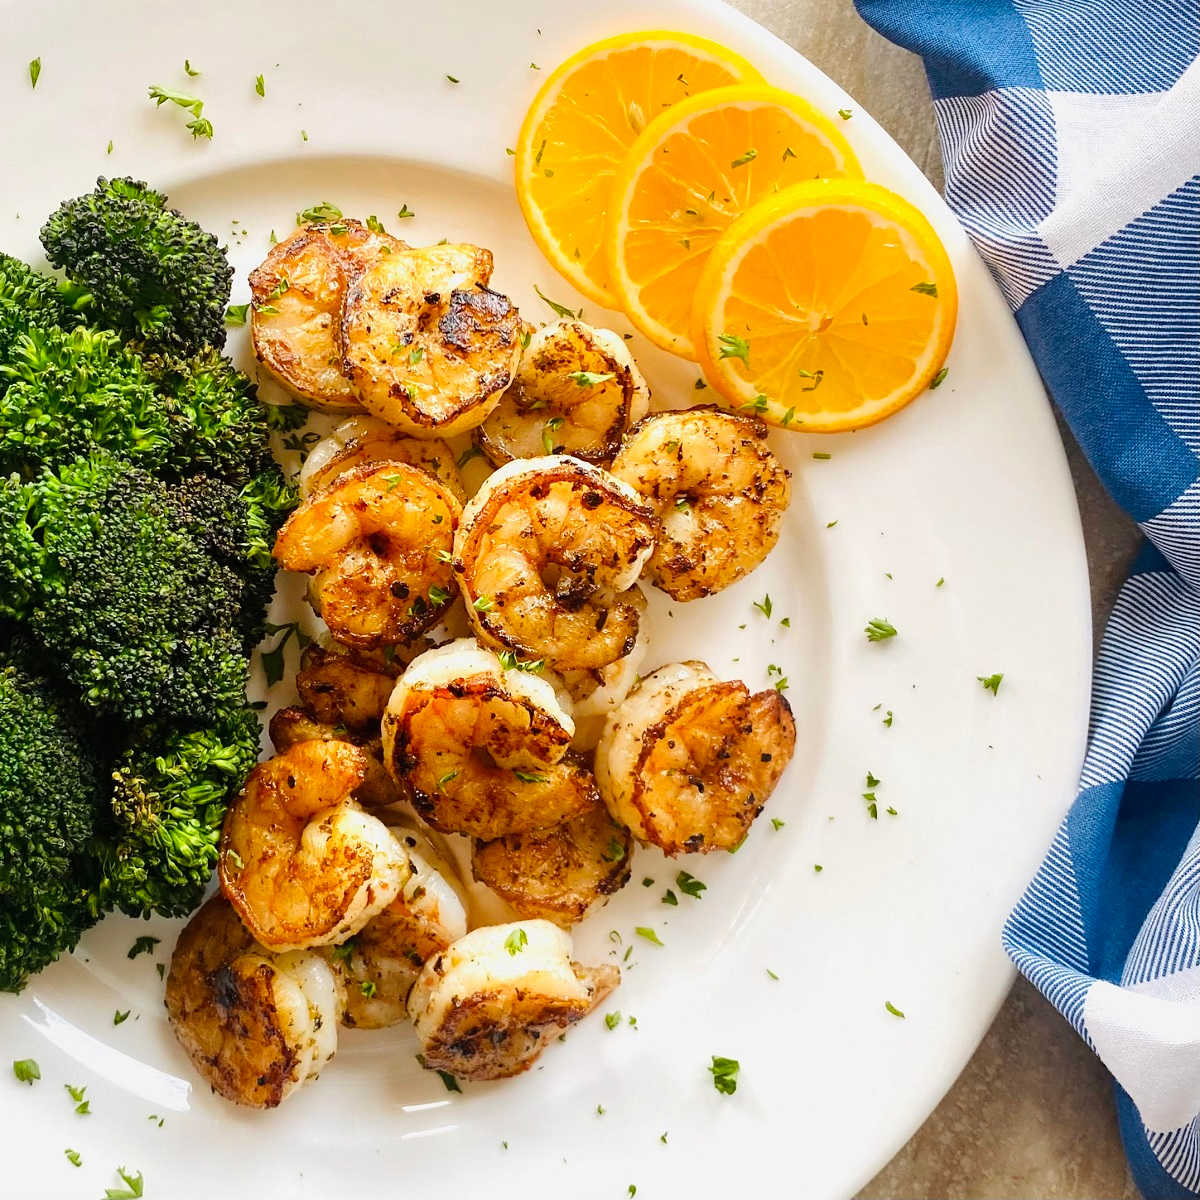 pan seared prawns on a plate with lemon, broccoli and garnished with parsley.